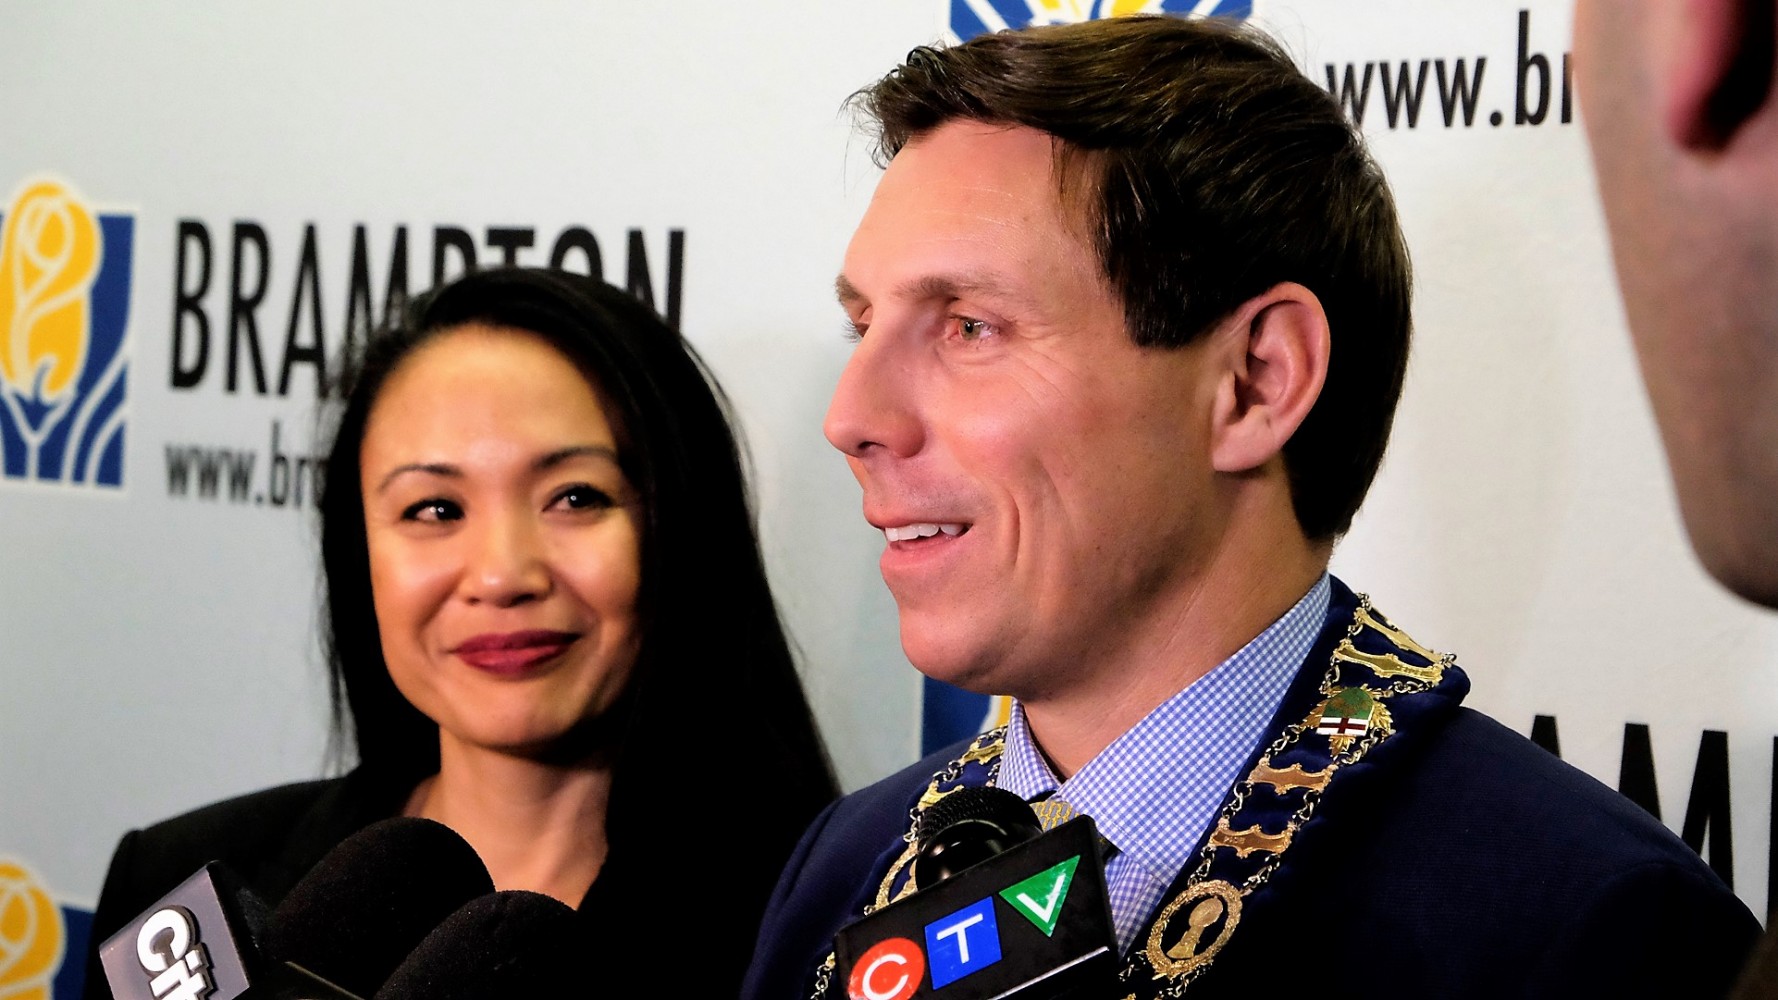 Patrick Brown & allies cancel future Council meetings ahead of election, suppress investigation details